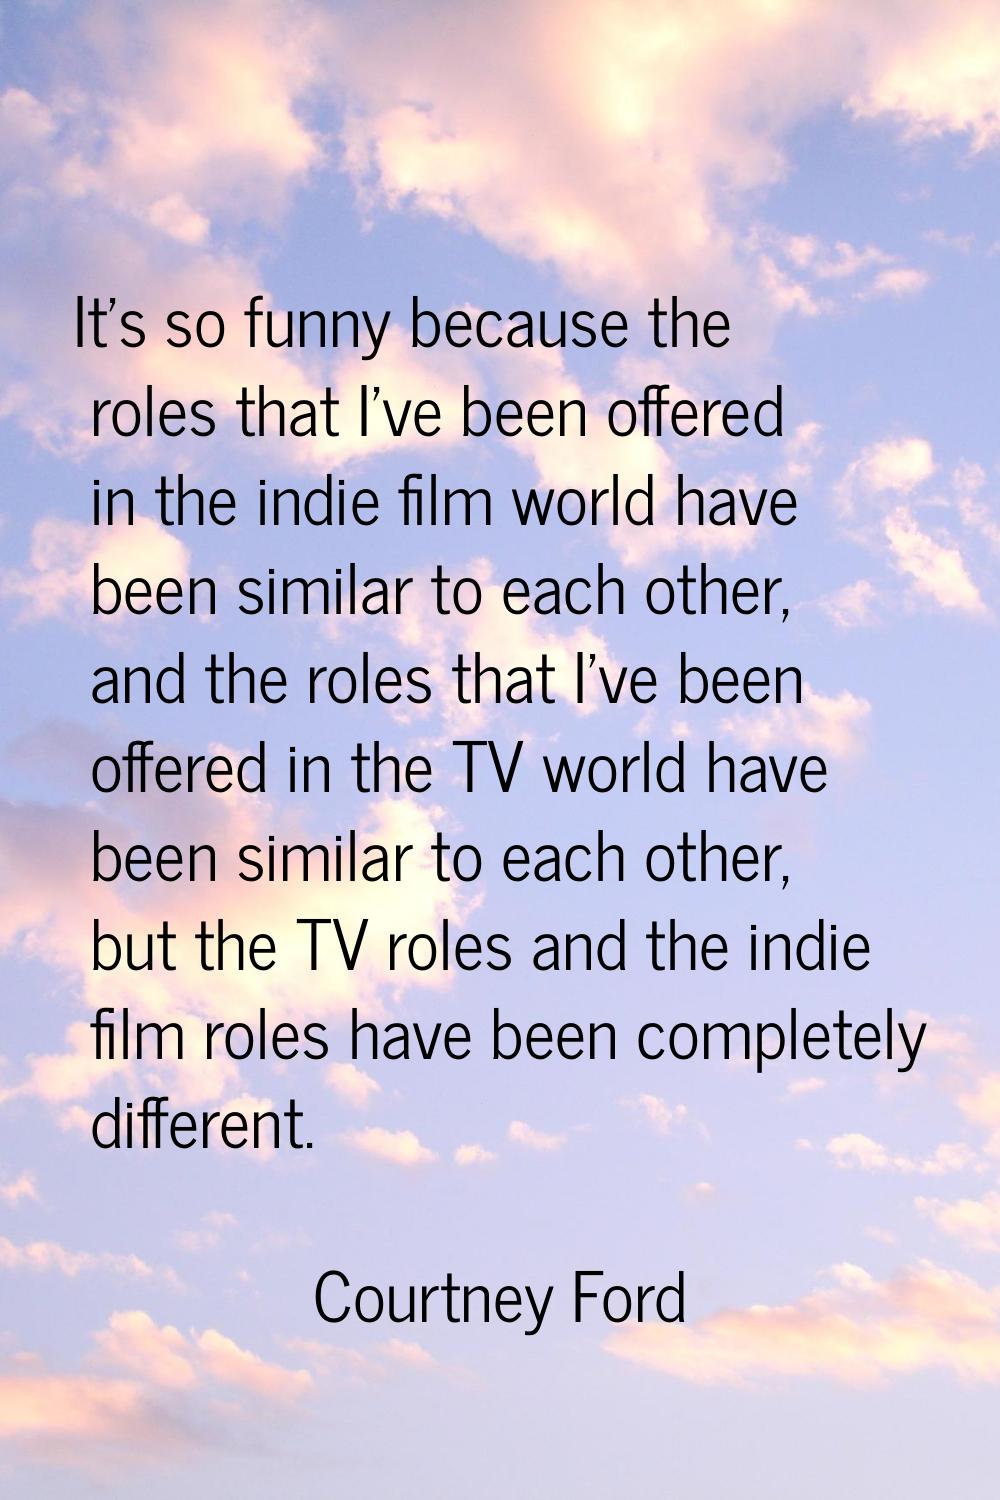 It's so funny because the roles that I've been offered in the indie film world have been similar to